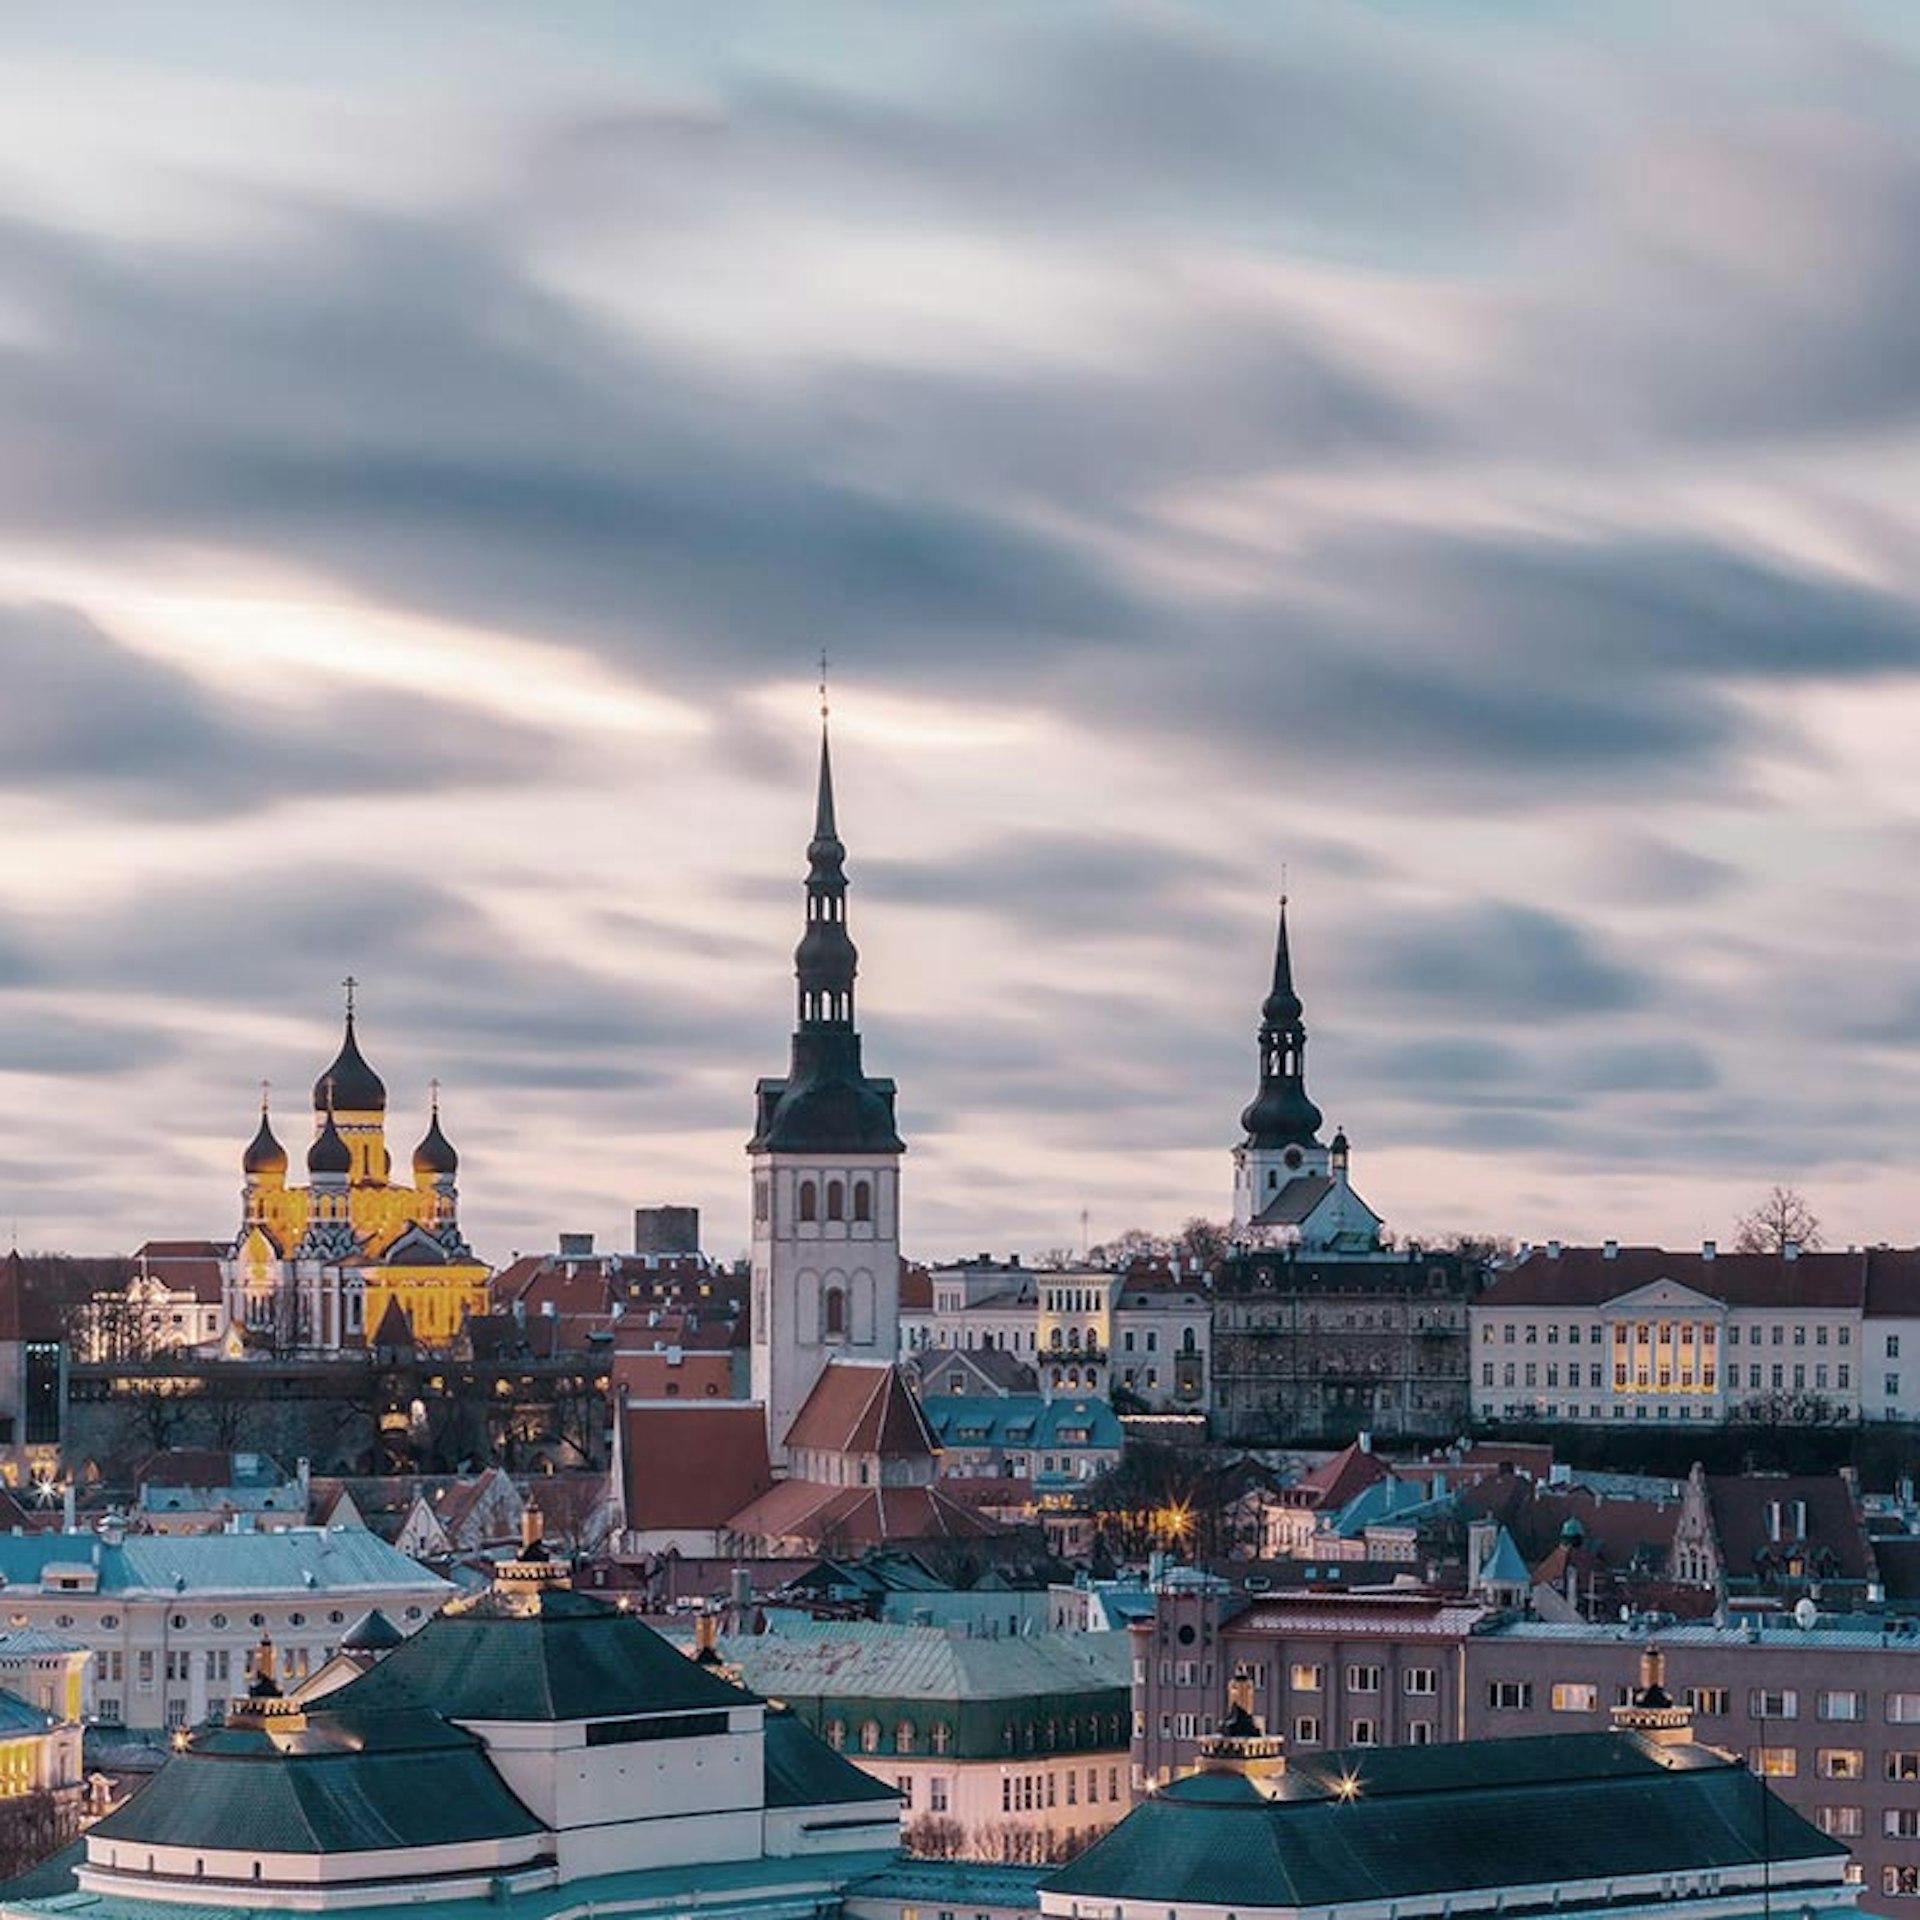 Get the latest news and updates on e-invoicing, e-ordering, e-archiving and indirect tax regulatory requirements for Estonia.